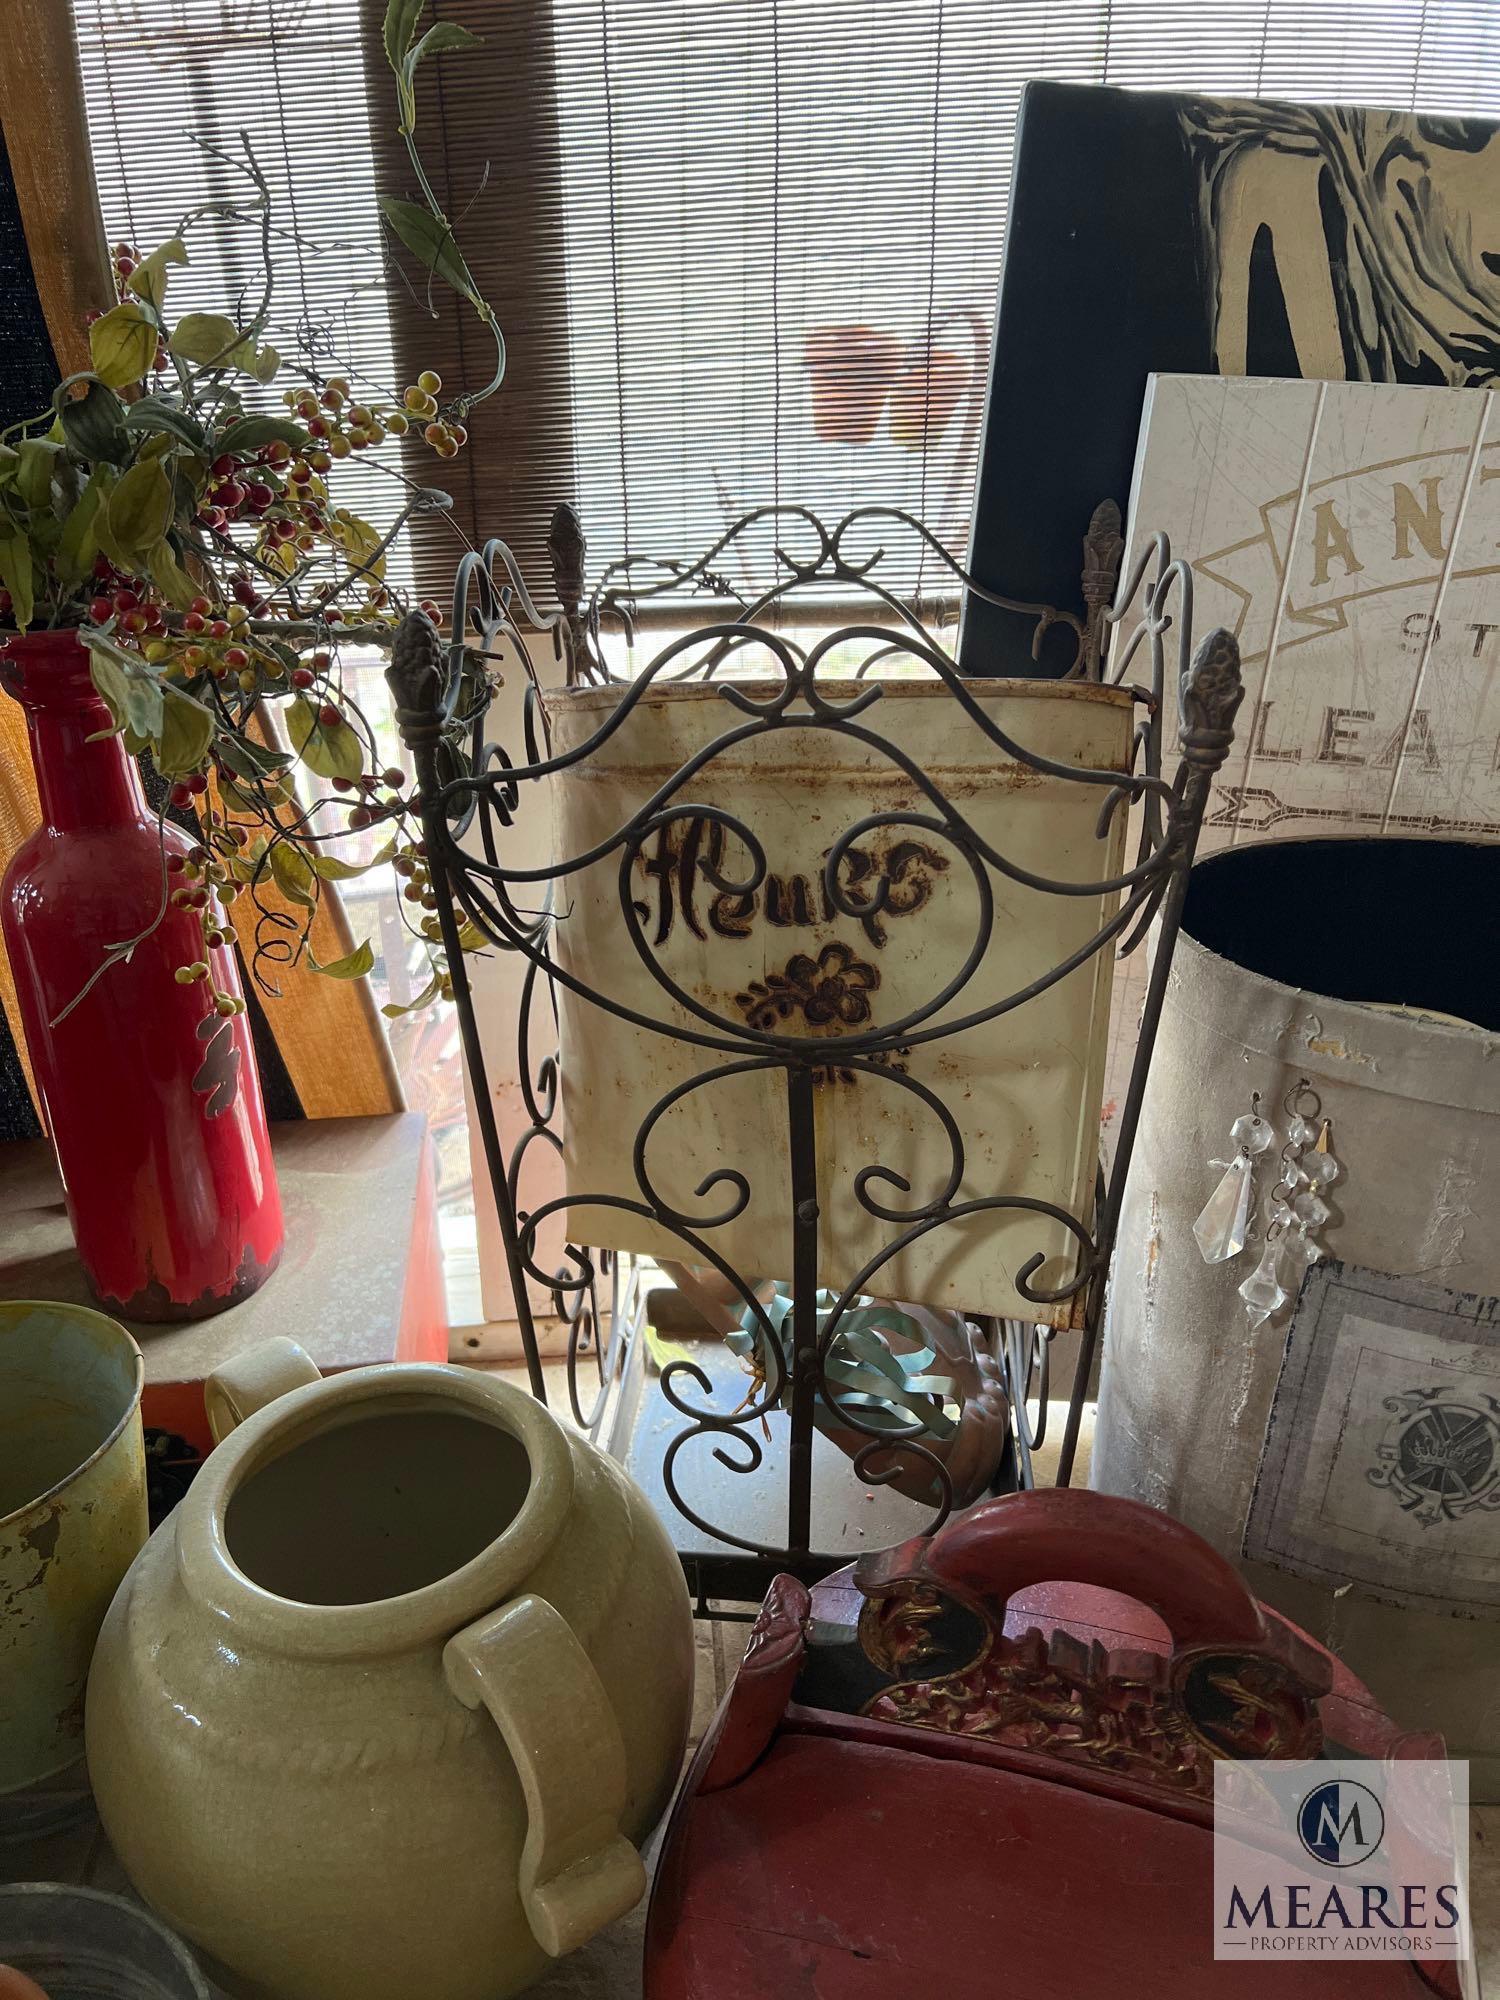 Lot of Patio Items - Including Metal Rack, Topiary, Vases